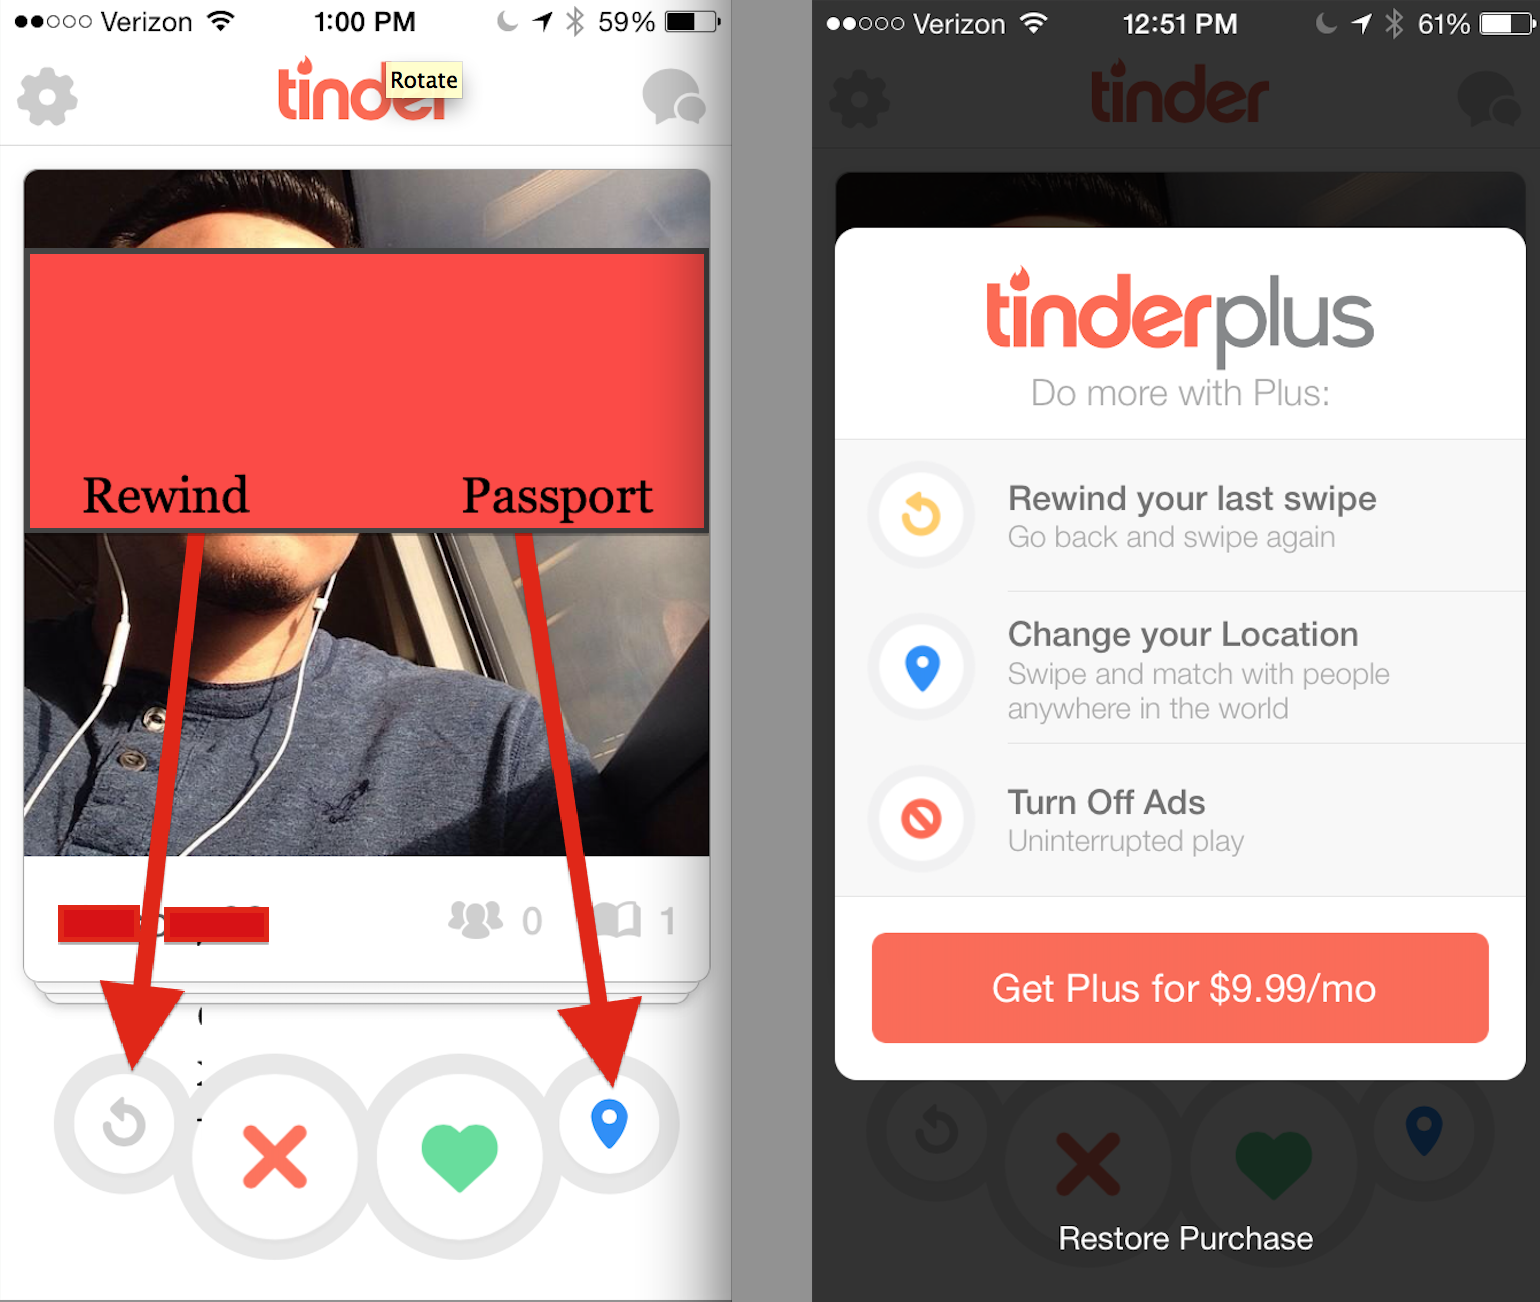 1540x1302 Here's What The New Tinder Plus Looks Like Gigaom. 